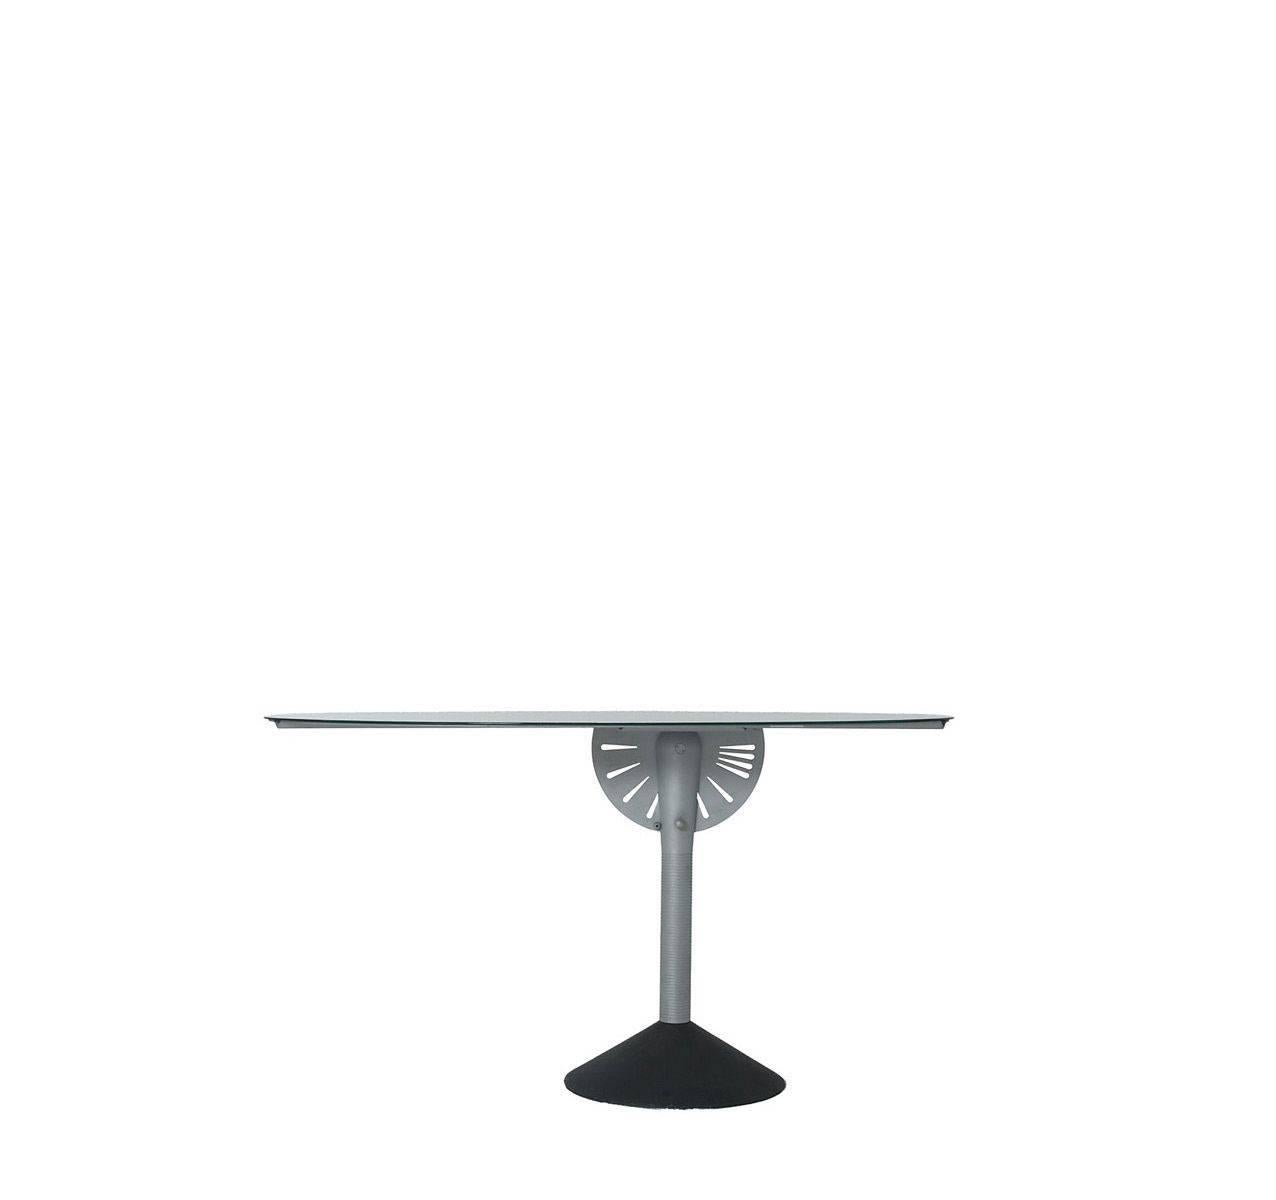 With his usual skill, supported by a strong capacity for imagination, Philippe Starck designs a mirror (or table) that, with the simple twish of a joint, turns into a table (or mirror).